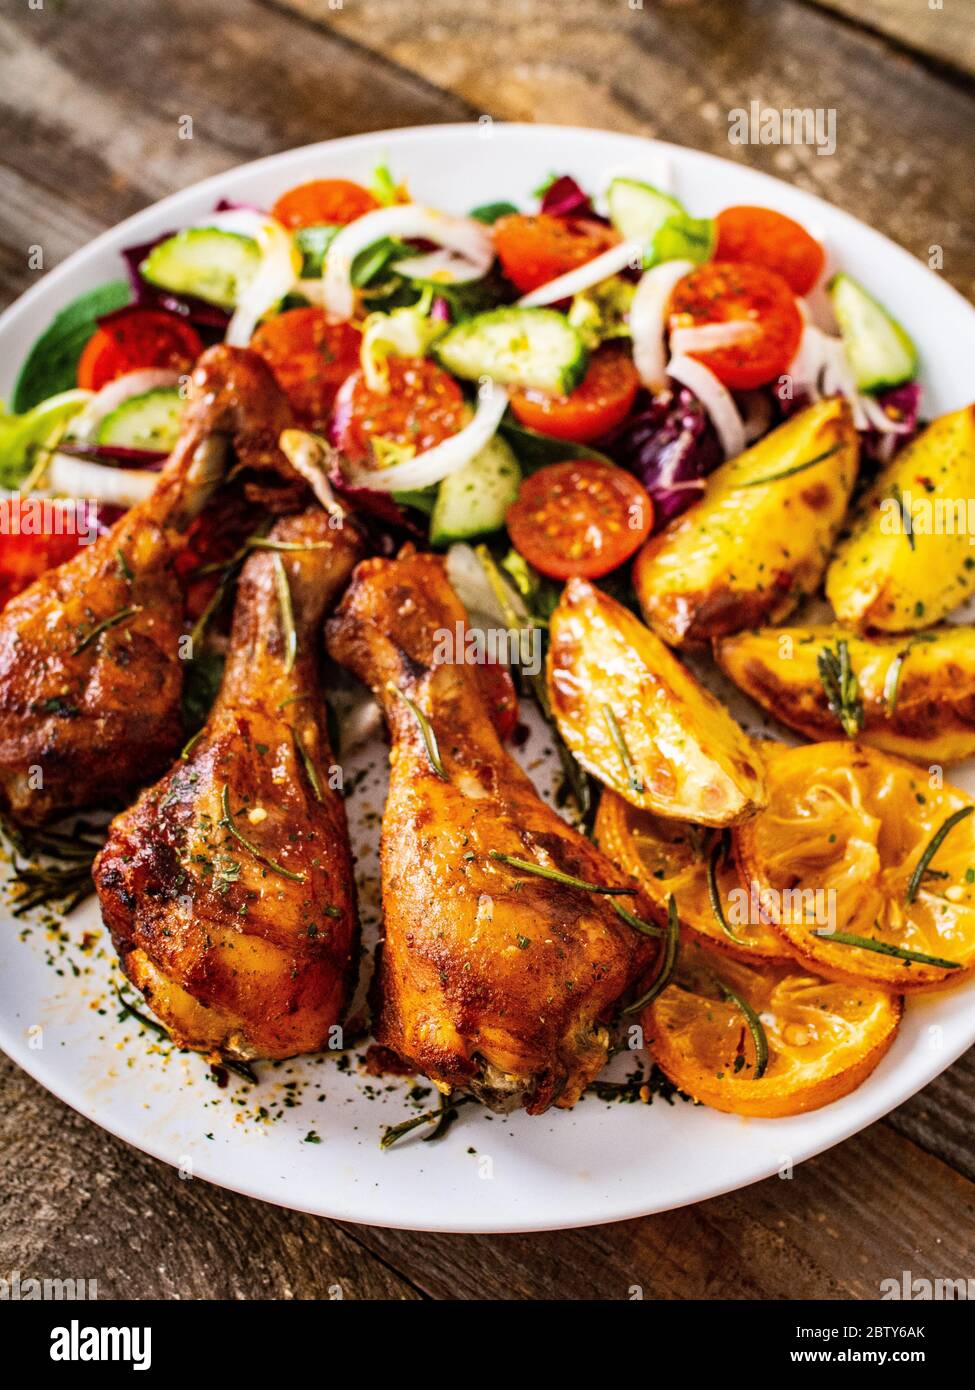 Grilled chicken drumsticks with baked potatoes and vegetables Stock Photo